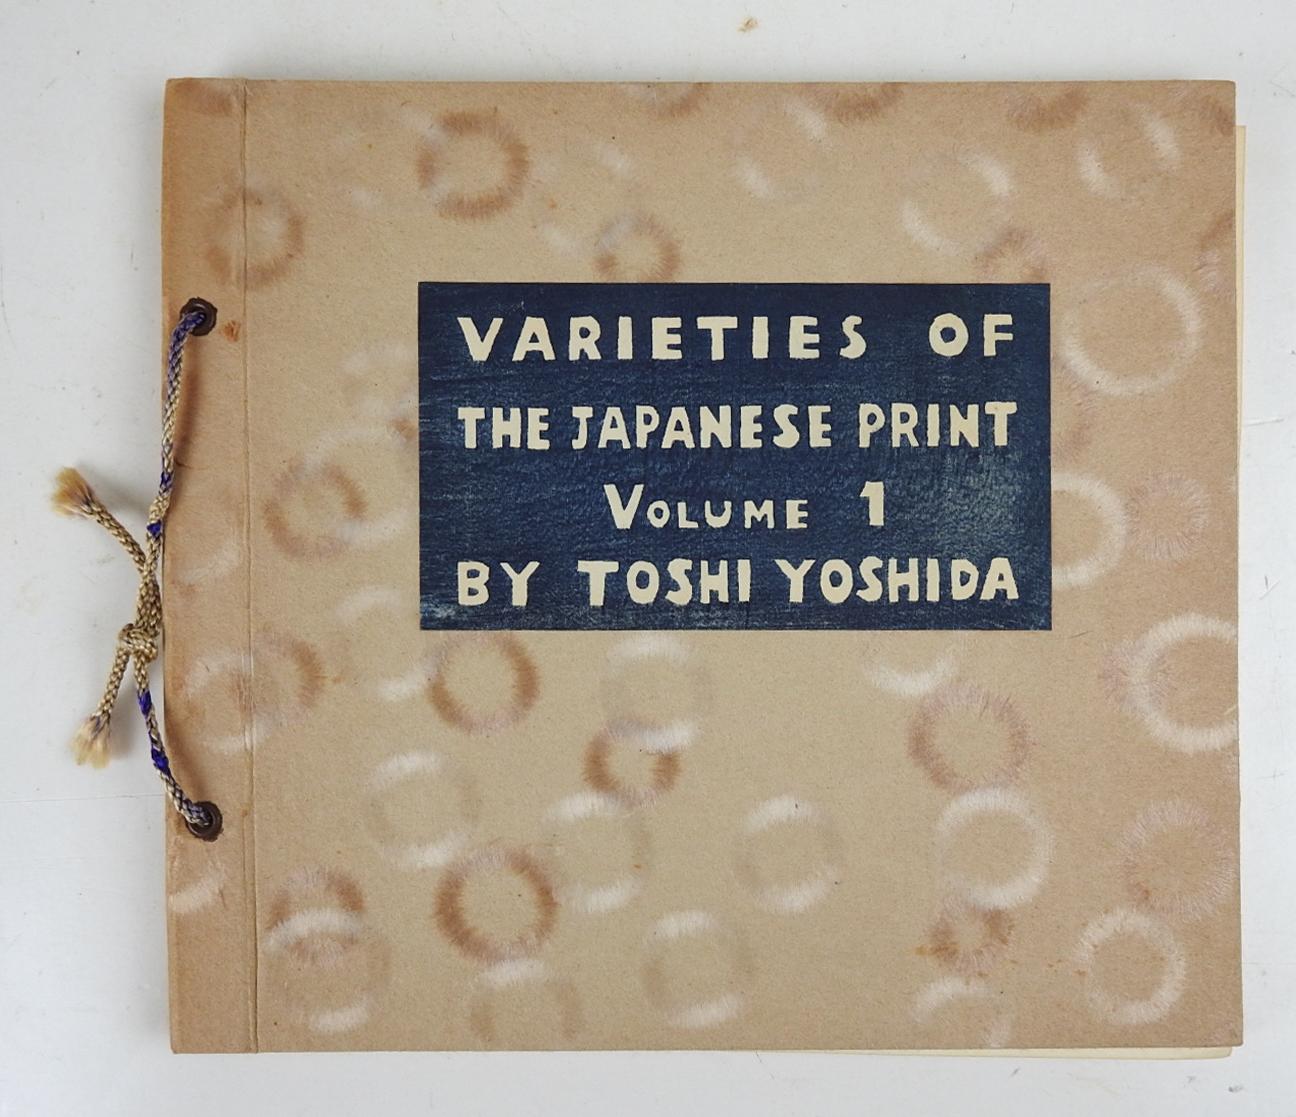 Varieties of the Japanese Print, with 20 Hand Printed Examples Volume 1 by Toshi Yoshida.  Published privately in Tokyo, 1967.  Signed and inscribed by artist in english and japanese.  20 hand-printed examples of abstract woodblock prints on 12